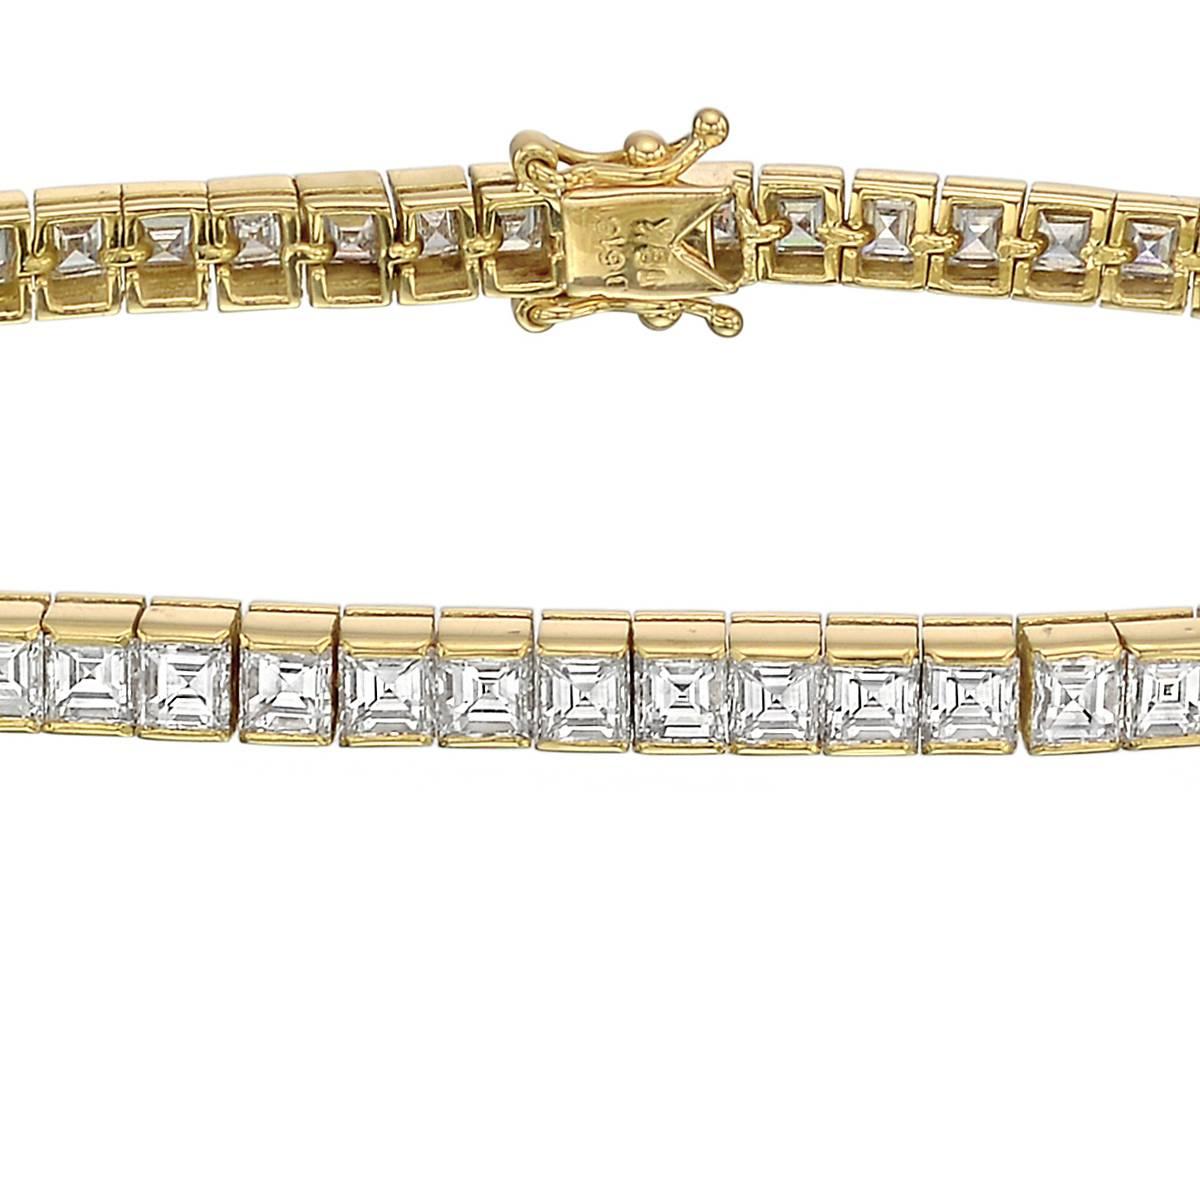 Square emerald-cut diamond line bracelet, the diamonds channel-set in 18k yellow gold. Near-colorless diamonds weighing approximately 6.13 total carats (averaging H-I color/VS1-VS2 clarity, or better). 6.75